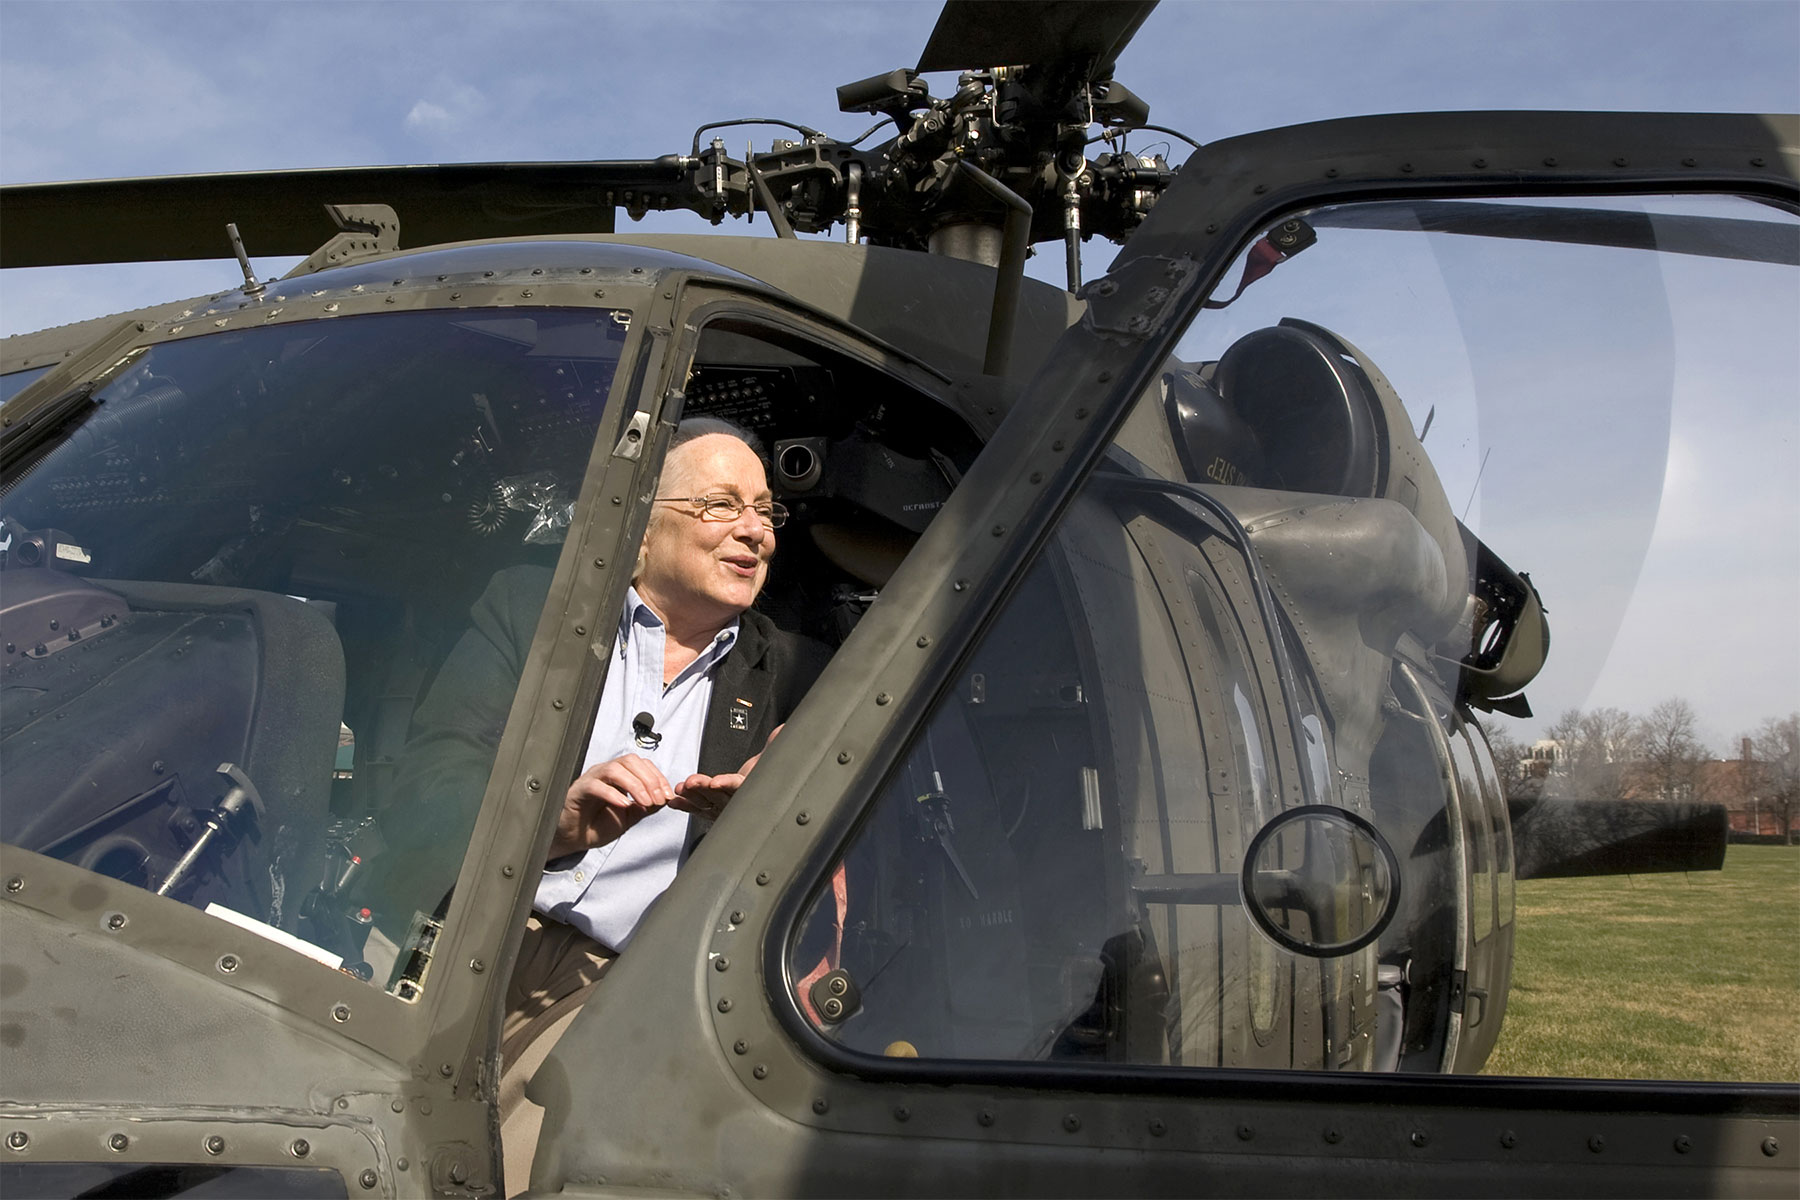 Retired Col. Sally Murphy checks out a Black Hawk helicopter at Fort Myer during a Freedom Team Salute program honoring her as the first woman to complete Army flight school at Fort Rucker in 1974 and became the Army's first female helicopter pilot. (U.S. Army)